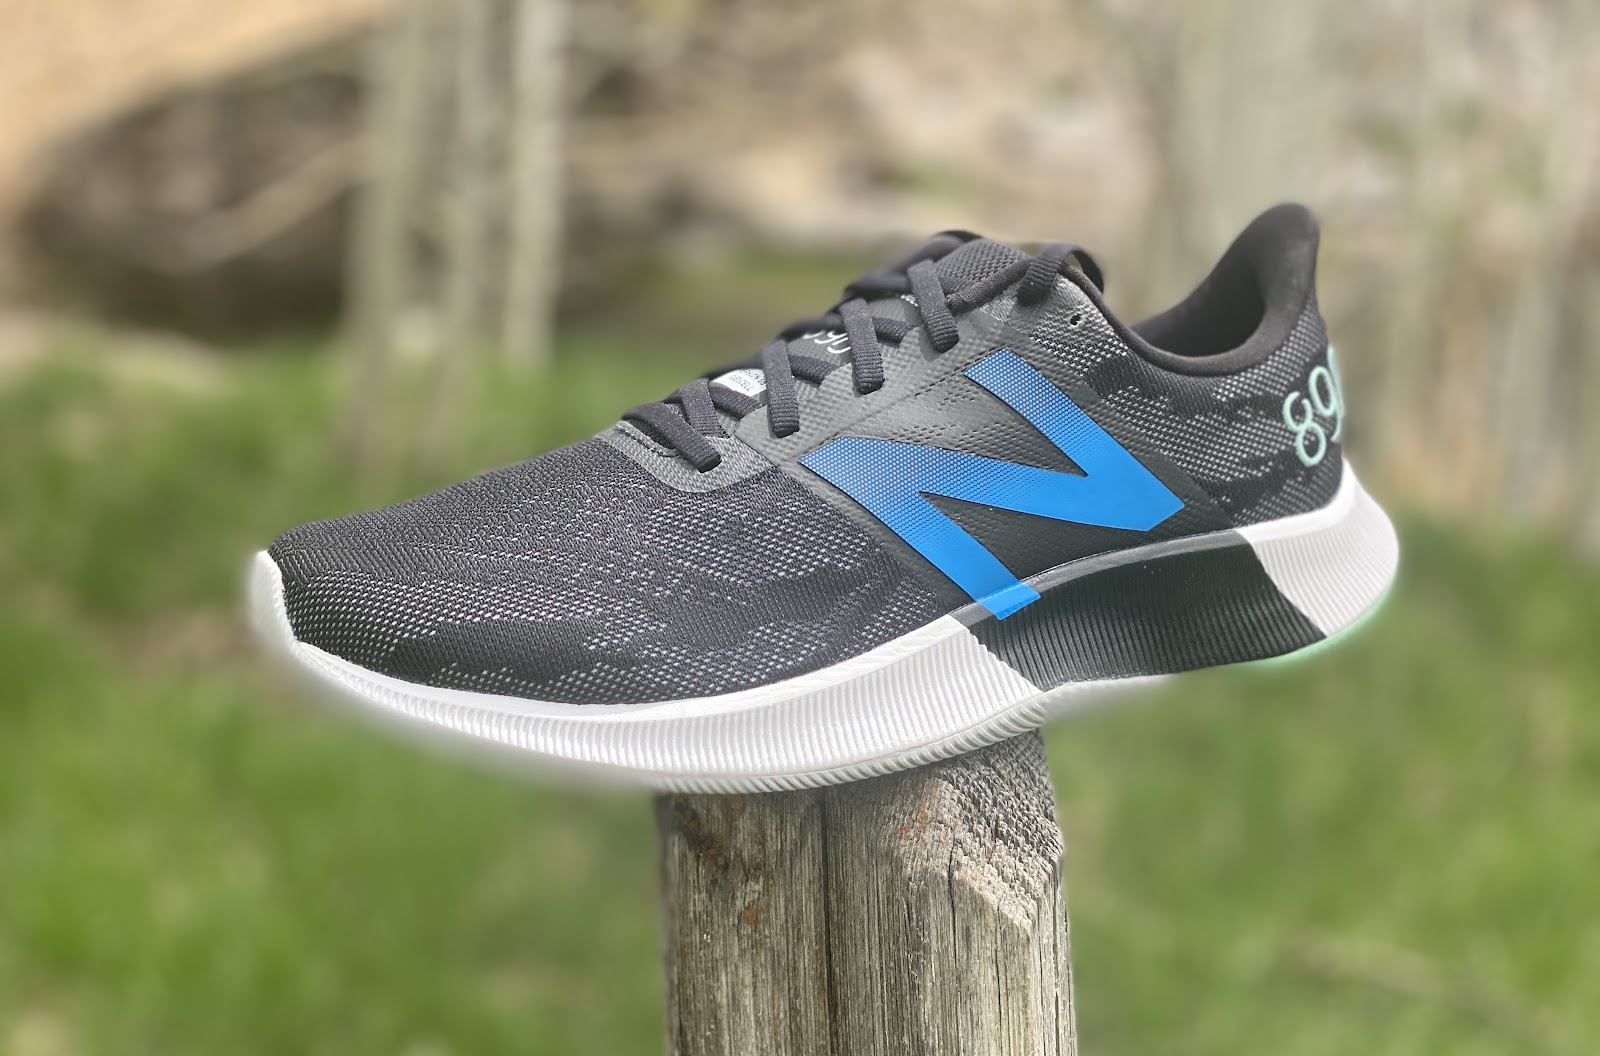 Road Trail Run: New Balance FuelCell 890 v8 Multi Tester Review